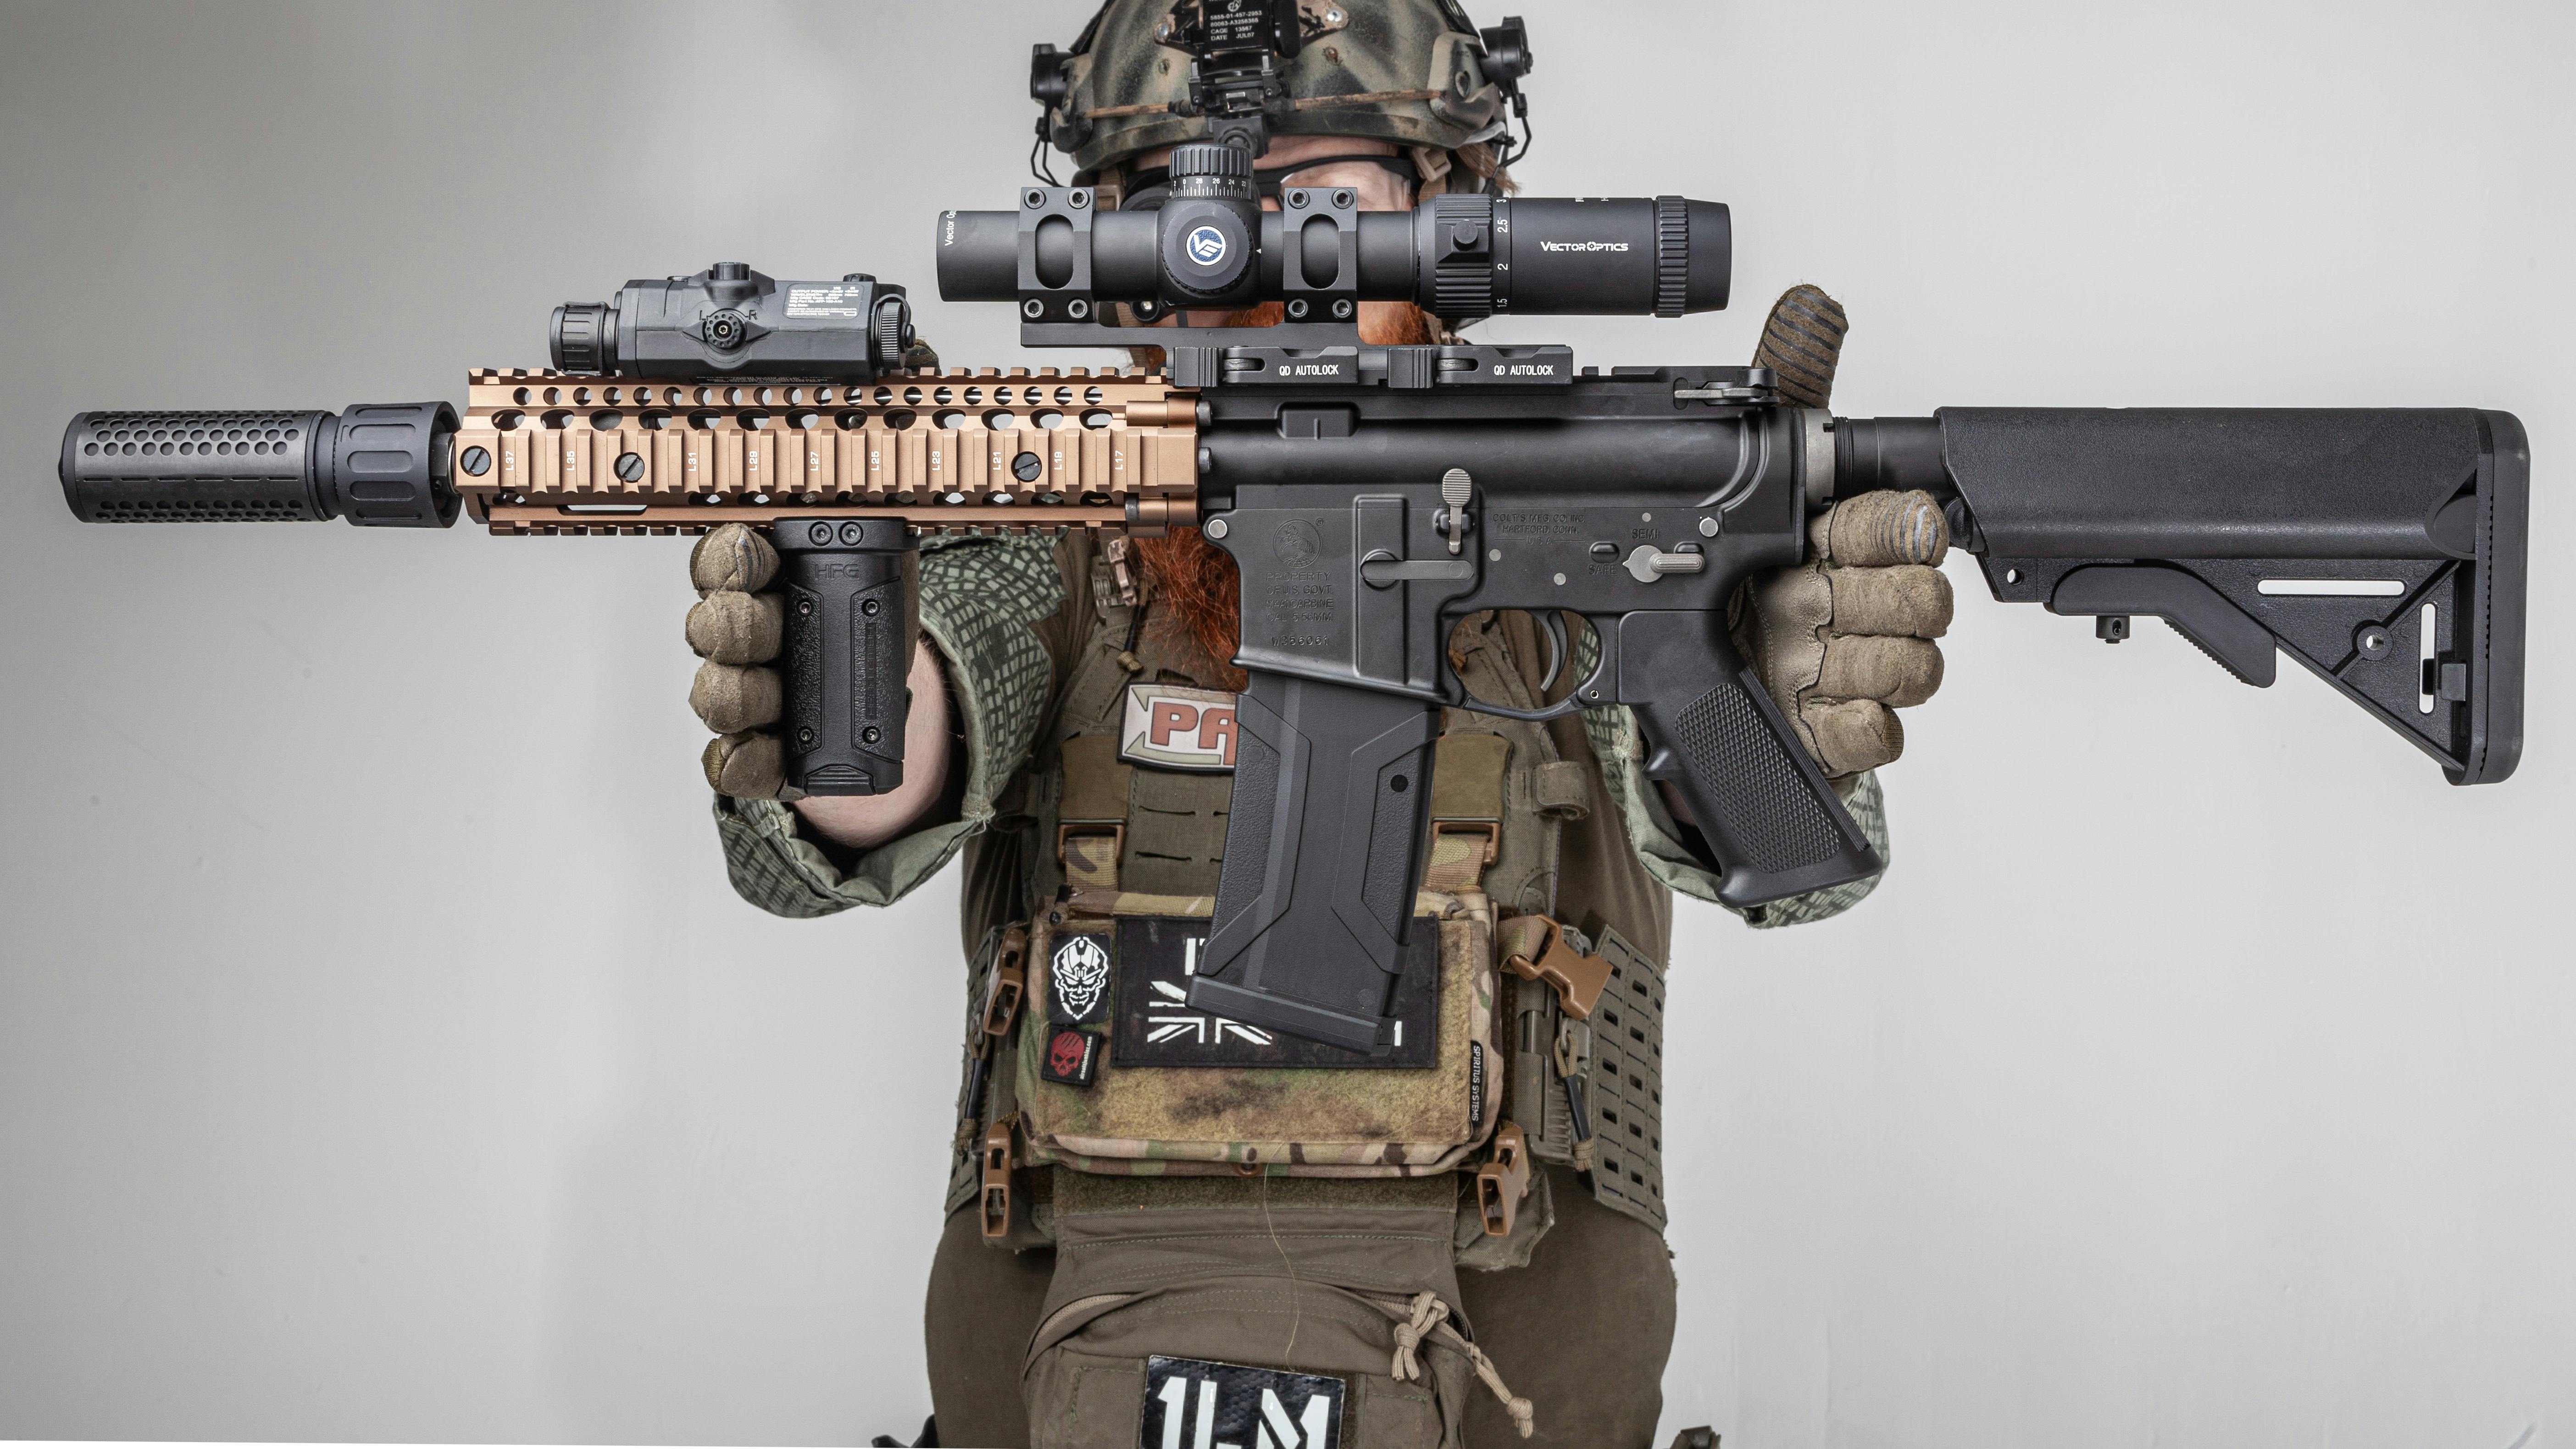 What's up with the Colt MK18 MOD 1 PTW?